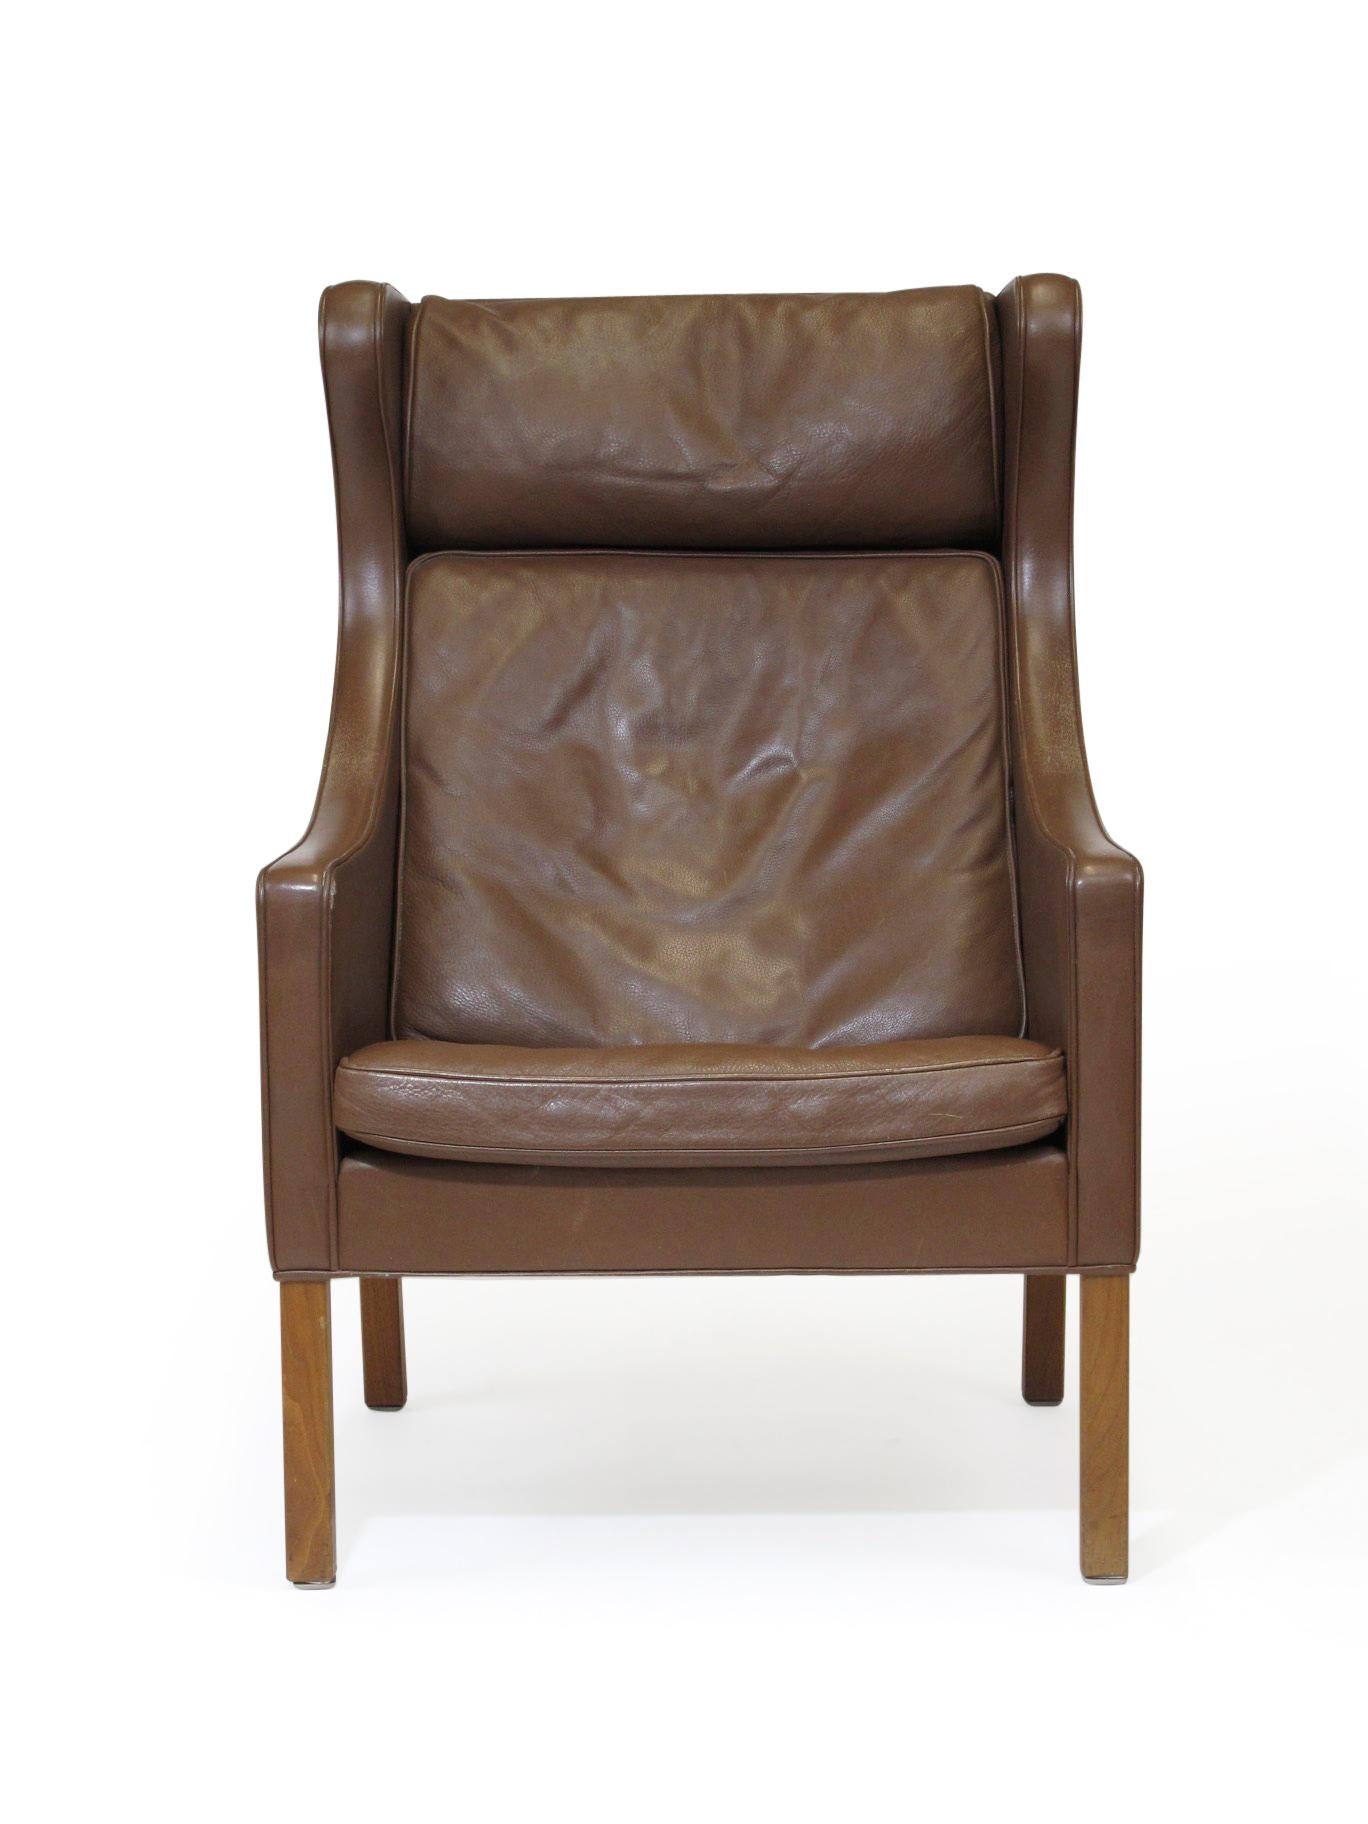 Danish Borge Mogensen Model 2204 Highback Brown Leather Lounge Chairs with Ottoman